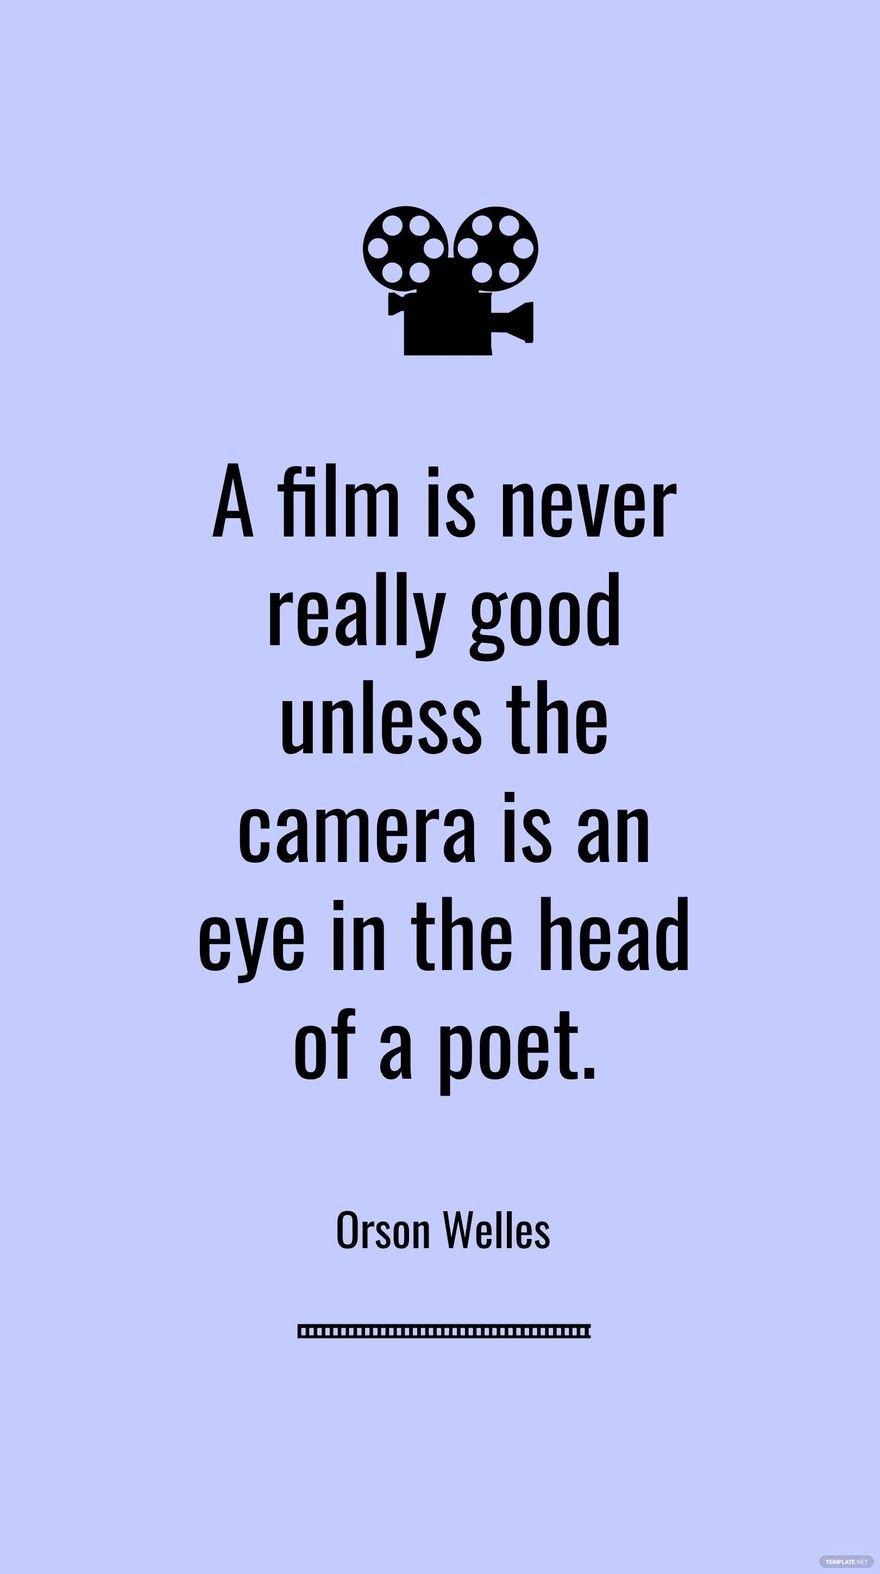 Orson Welles - A film is never really good unless the camera is an eye in the head of a poet. in JPG